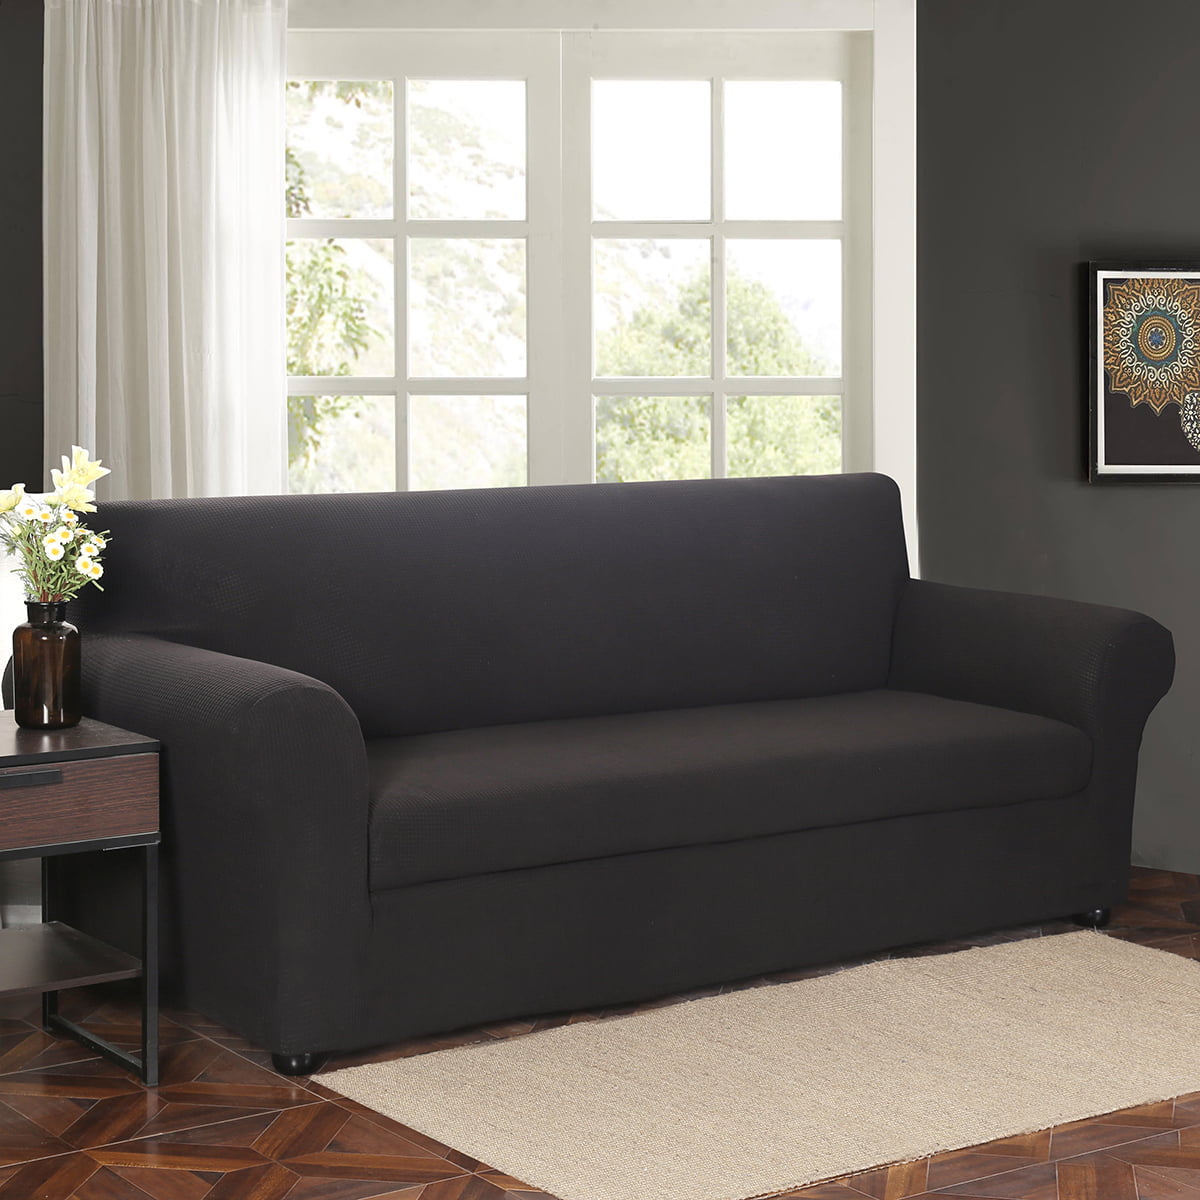 Details about   Velvet Embossing Floral Stretch Sofa Cover Living Room Sectional Couch Slipcover 